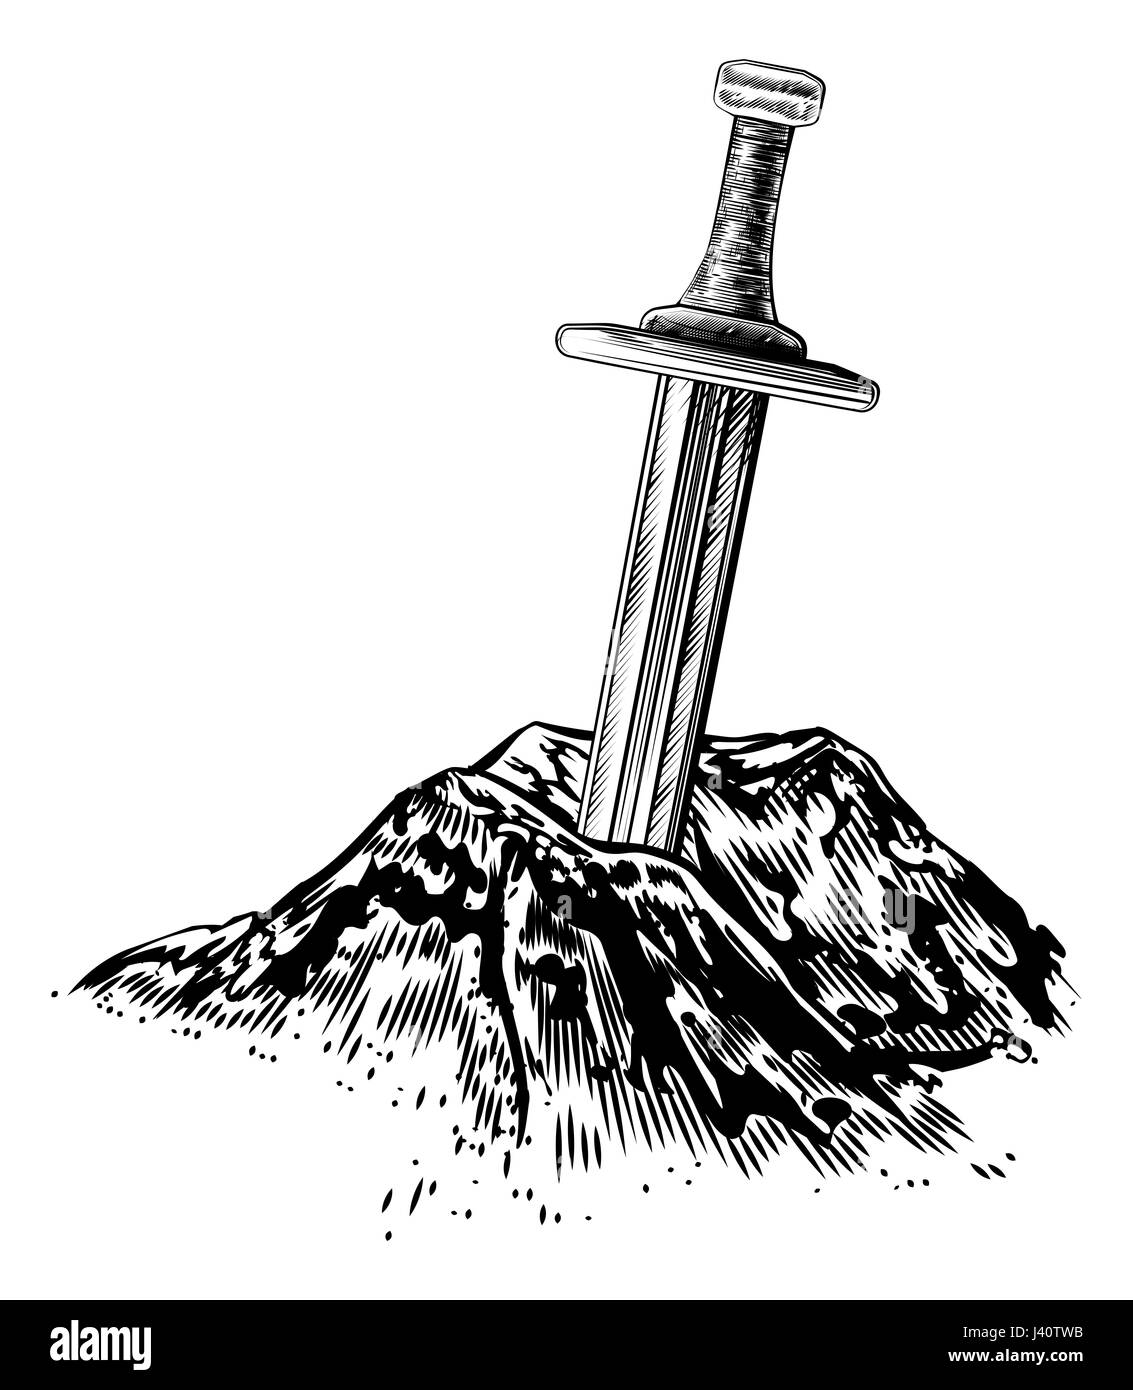 A vintage style illustration of  Excalibur the sword in the stone from the Arthurian legends Stock Photo